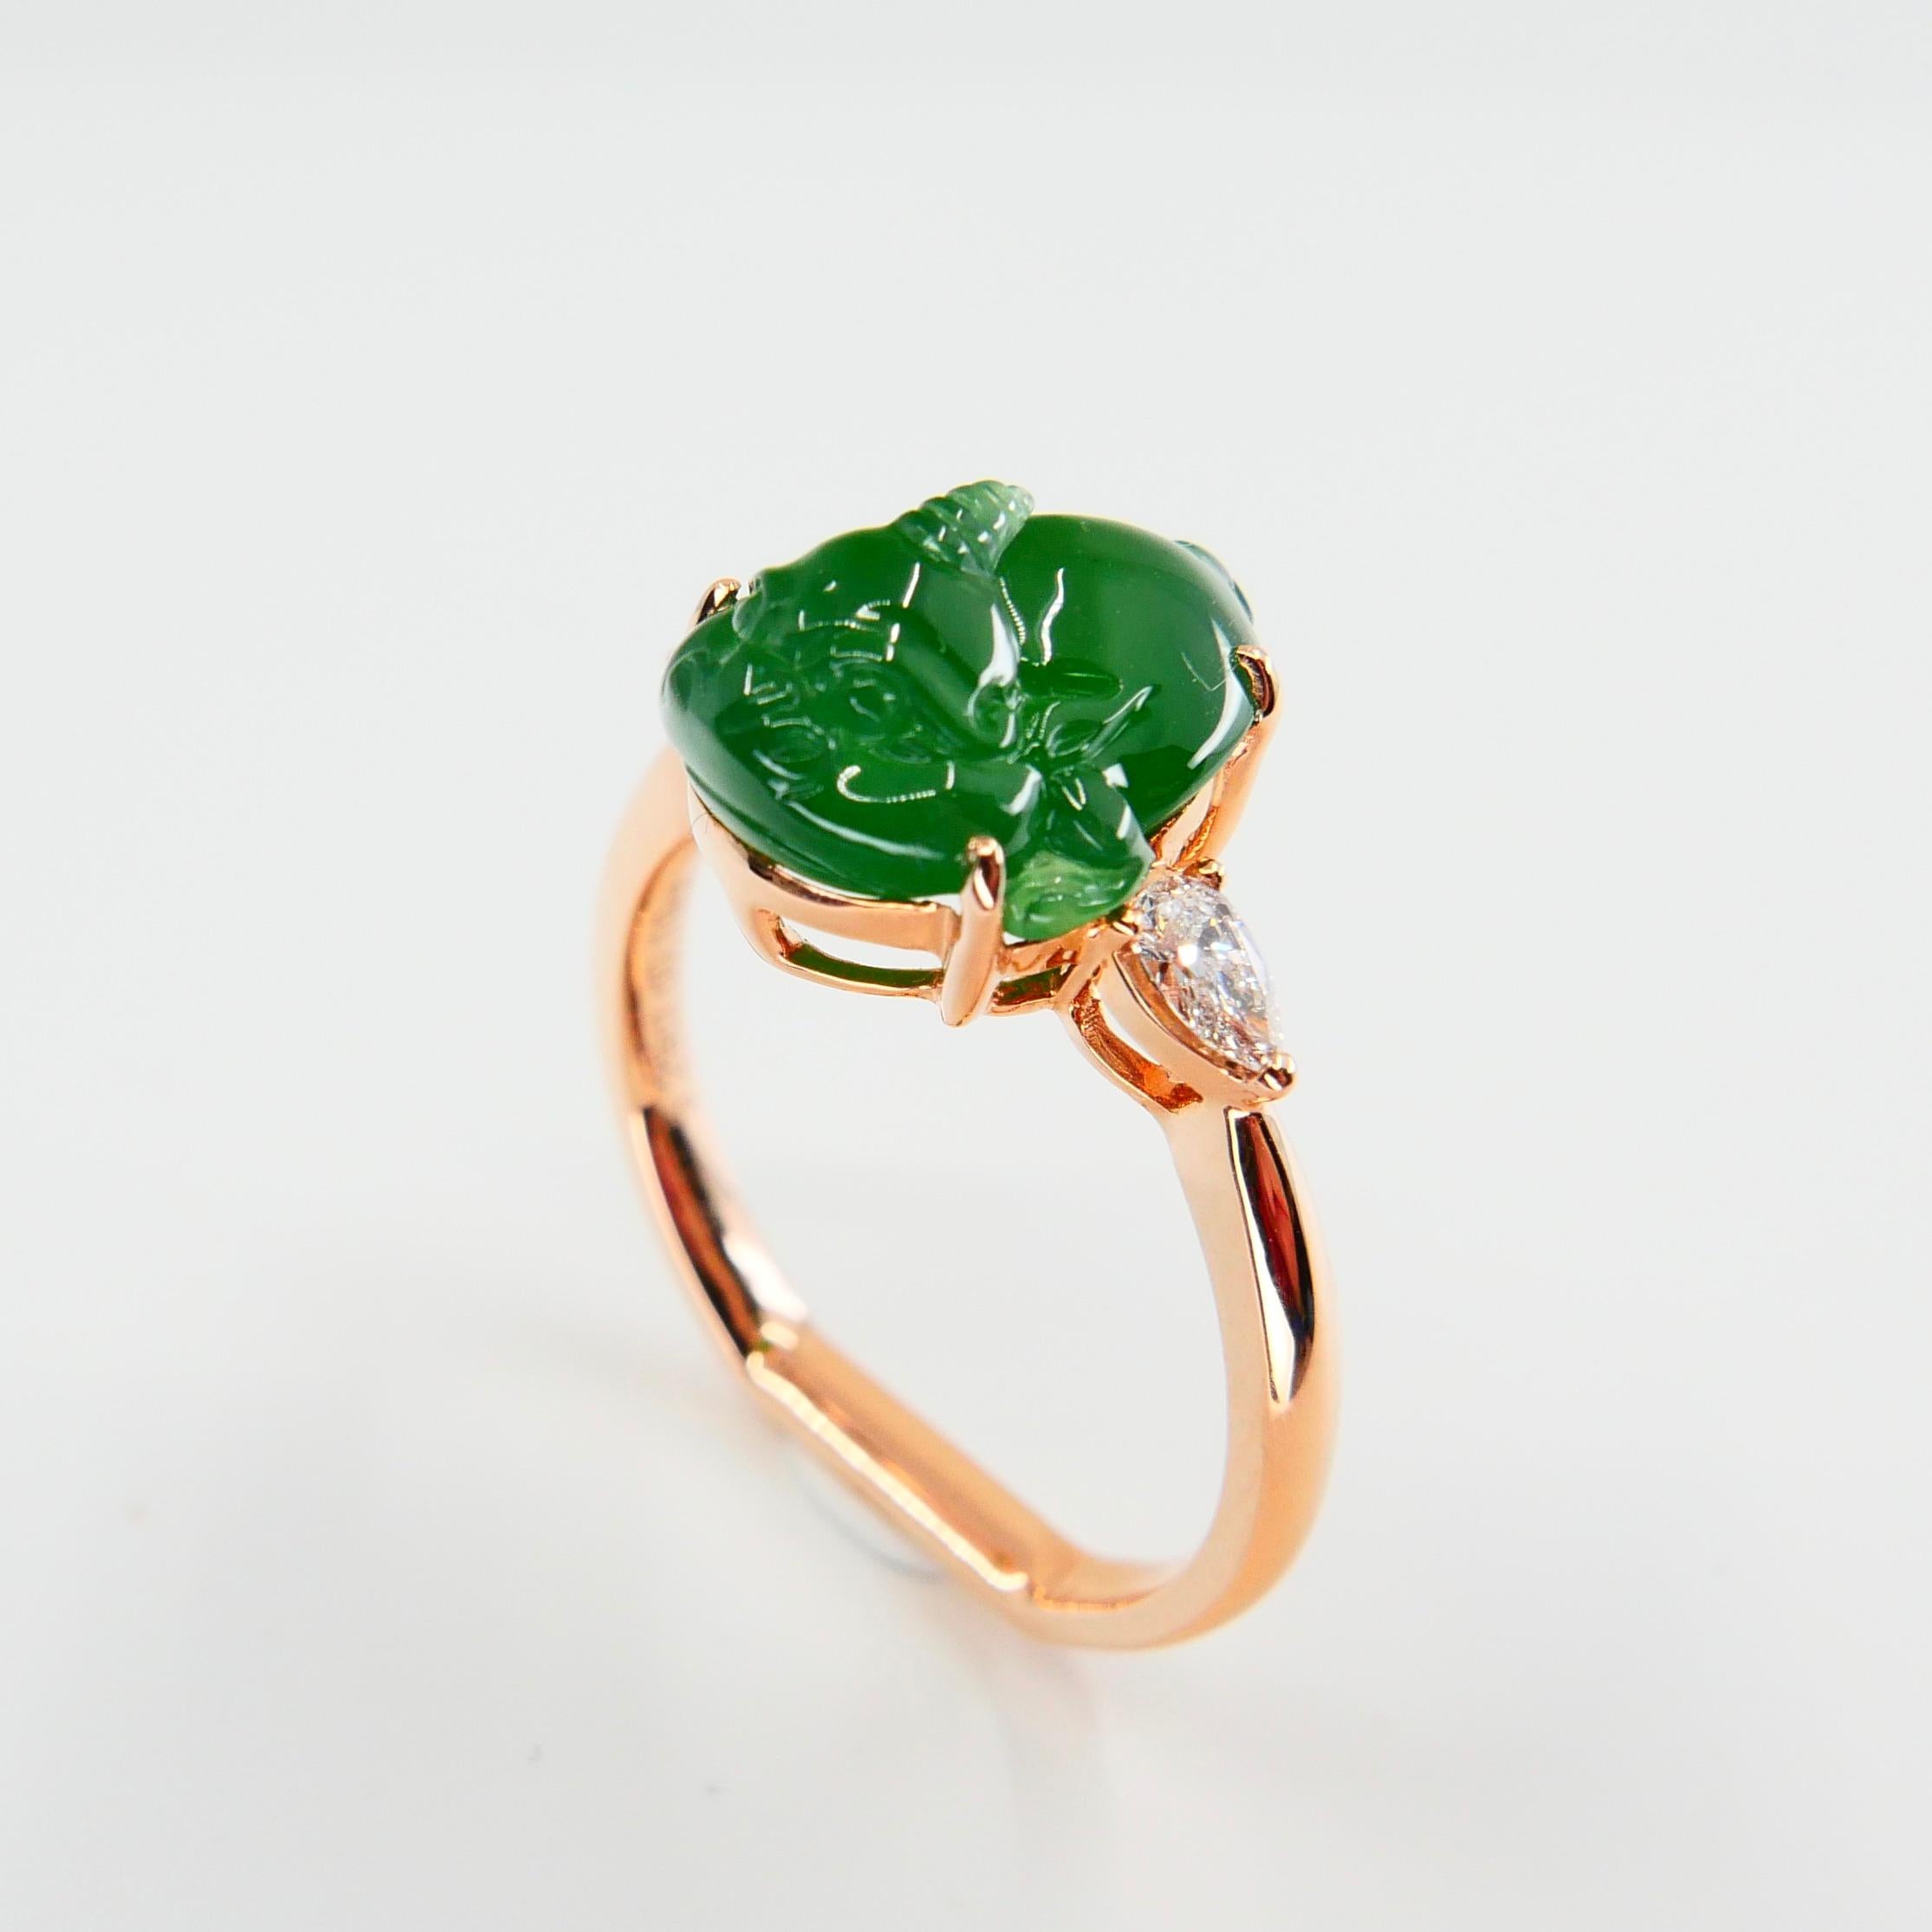 Contemporary Certified 5.29 Carat Type A Jade and Diamond Cocktail Ring, Best Imperial Green